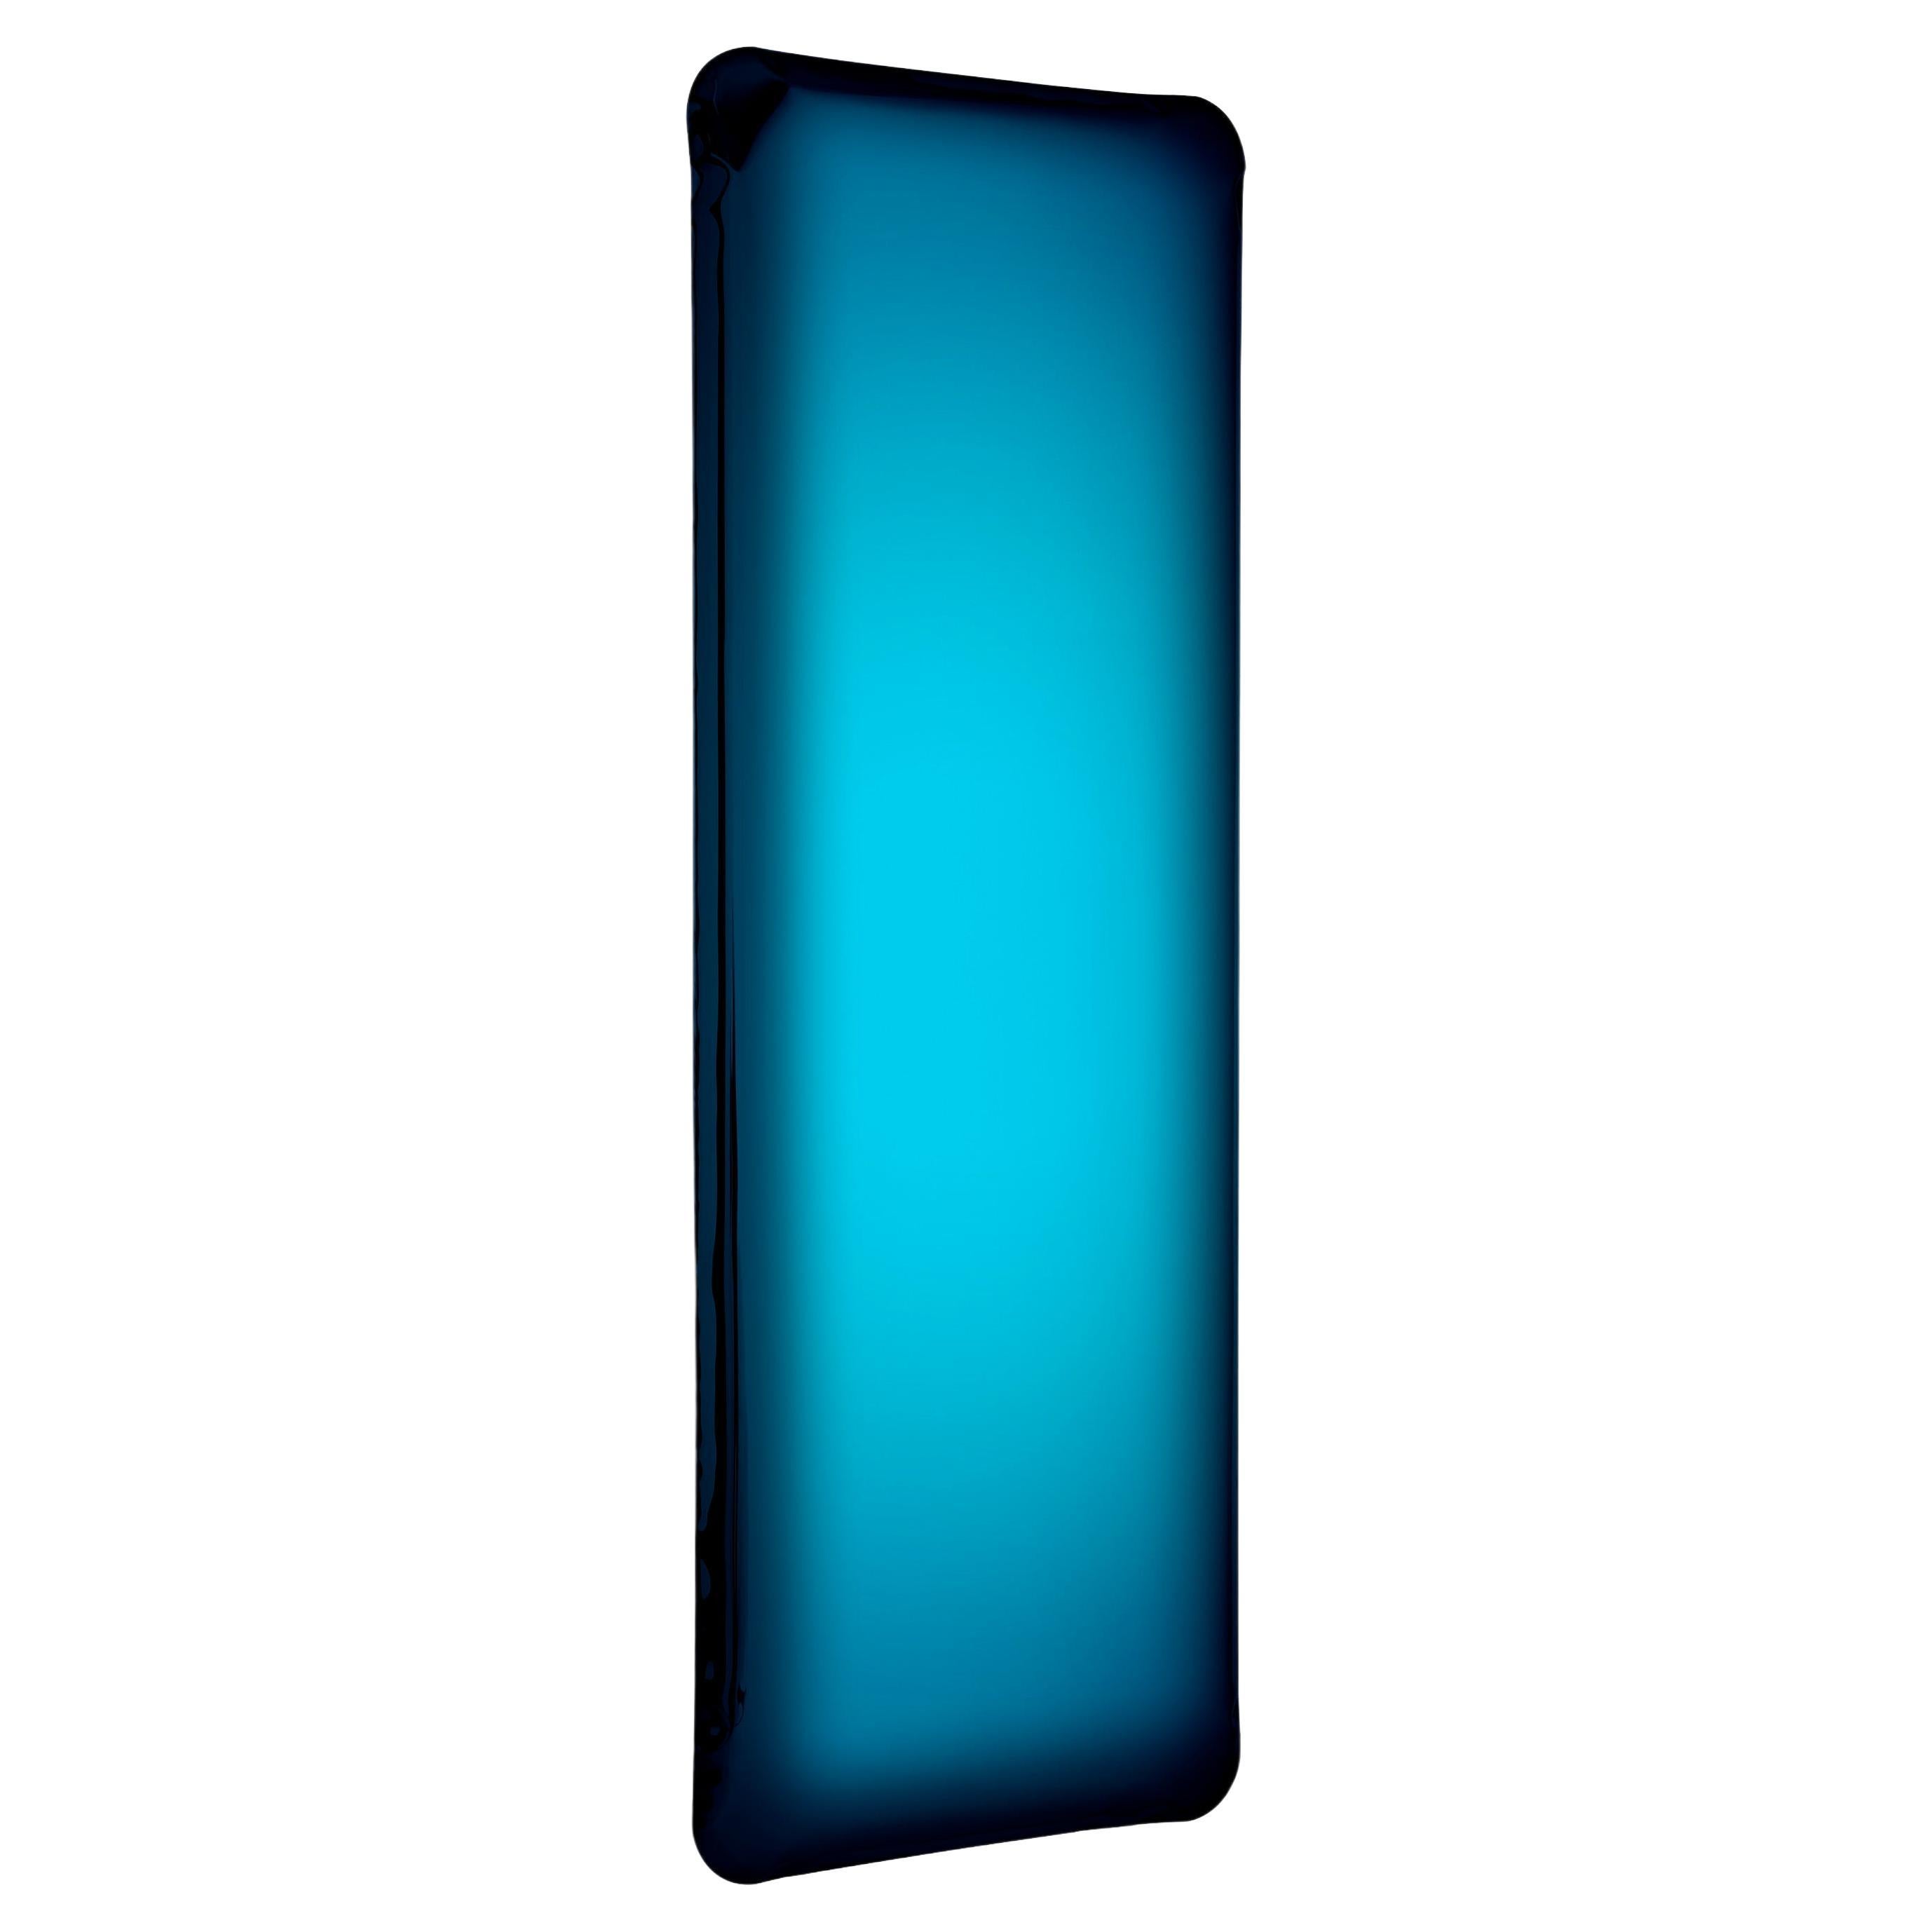 Tafla Q1 Polished Deep Space Blue Color Stainless Steel Wall Mirror by Zieta